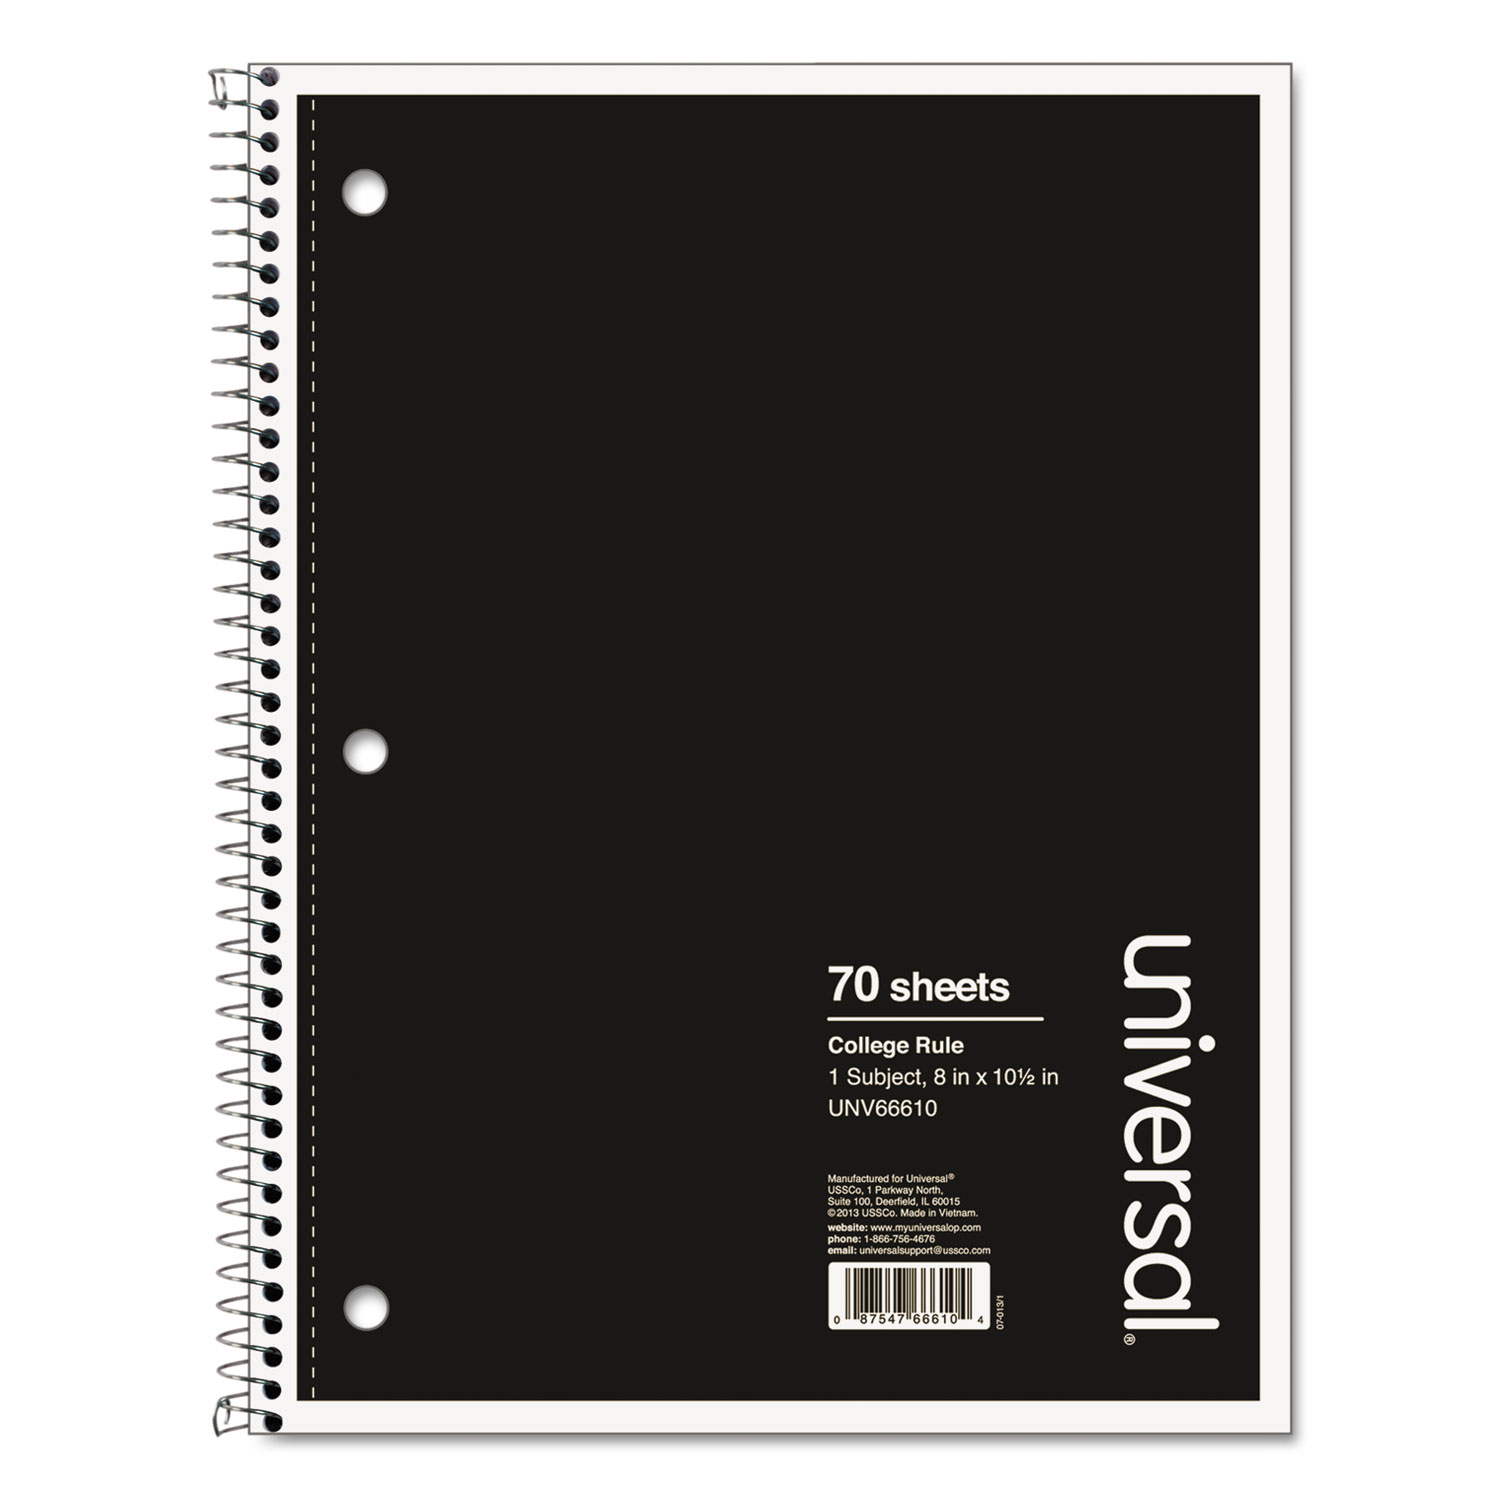  Universal UNV66610 Wirebound Notebook, 1 Subject, Medium/College Rule, Black Cover, 10.5 x 8, 70 Sheets (UNV66610) 